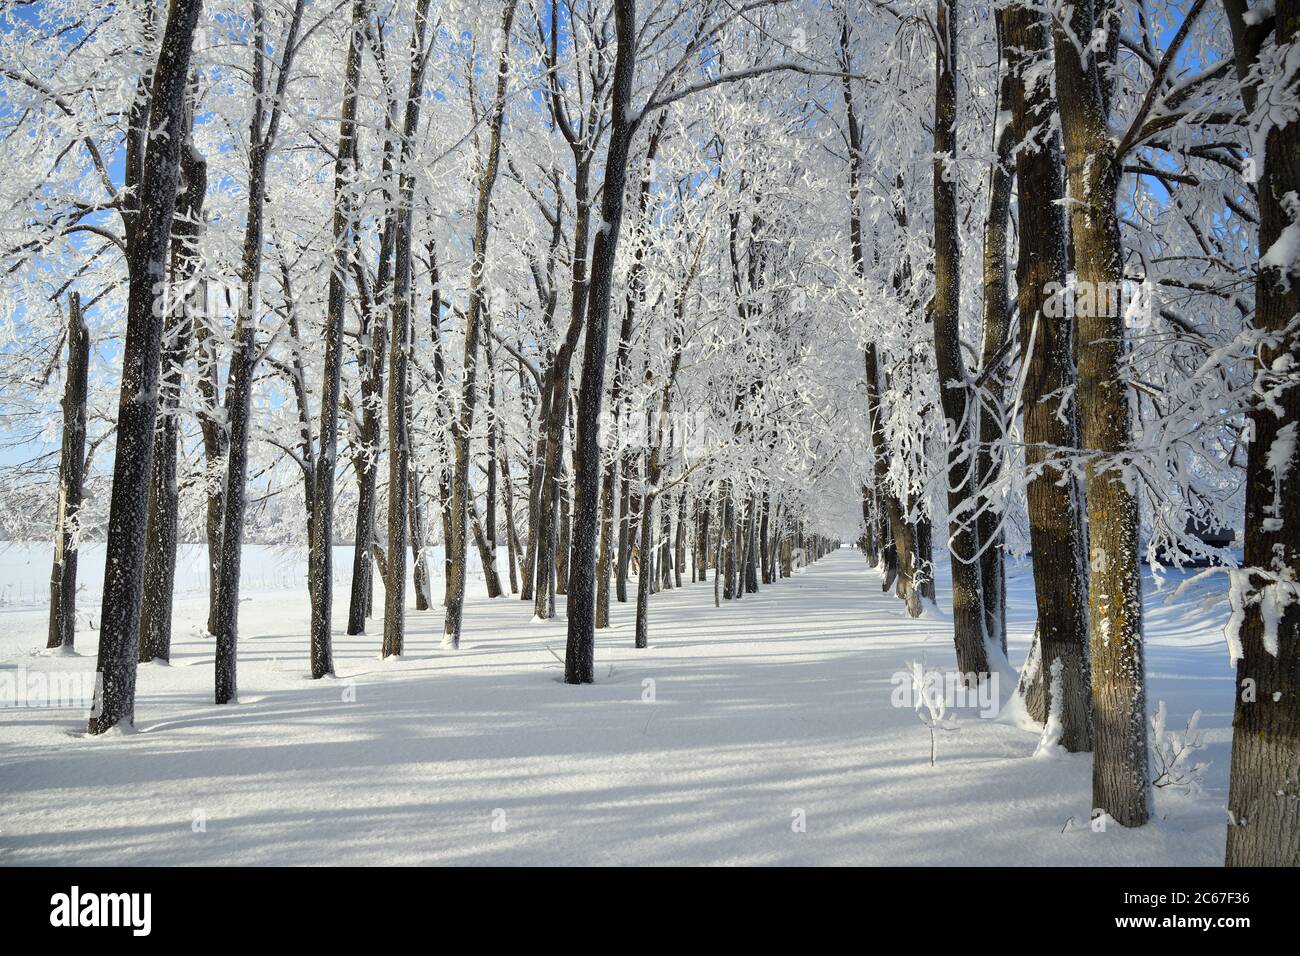 Winter landscape with falling snow - wonderland winter forest with snowfall over winter grove. Snowy winter scene. Winter forest, frozen trees coverd Stock Photo